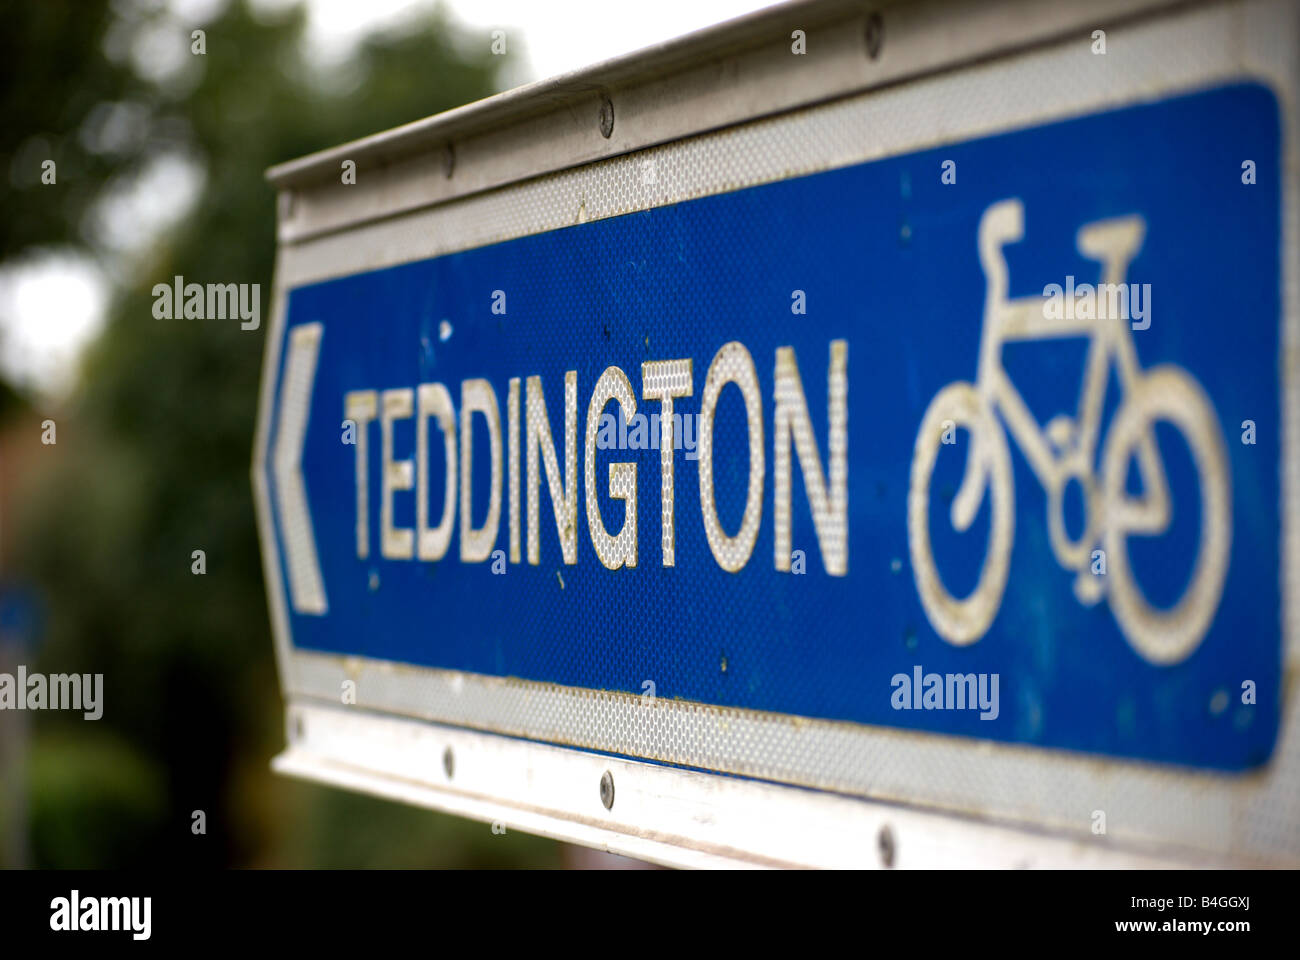 blue and white british cycle network sign for teddington, located in ham, southwest london, england Stock Photo